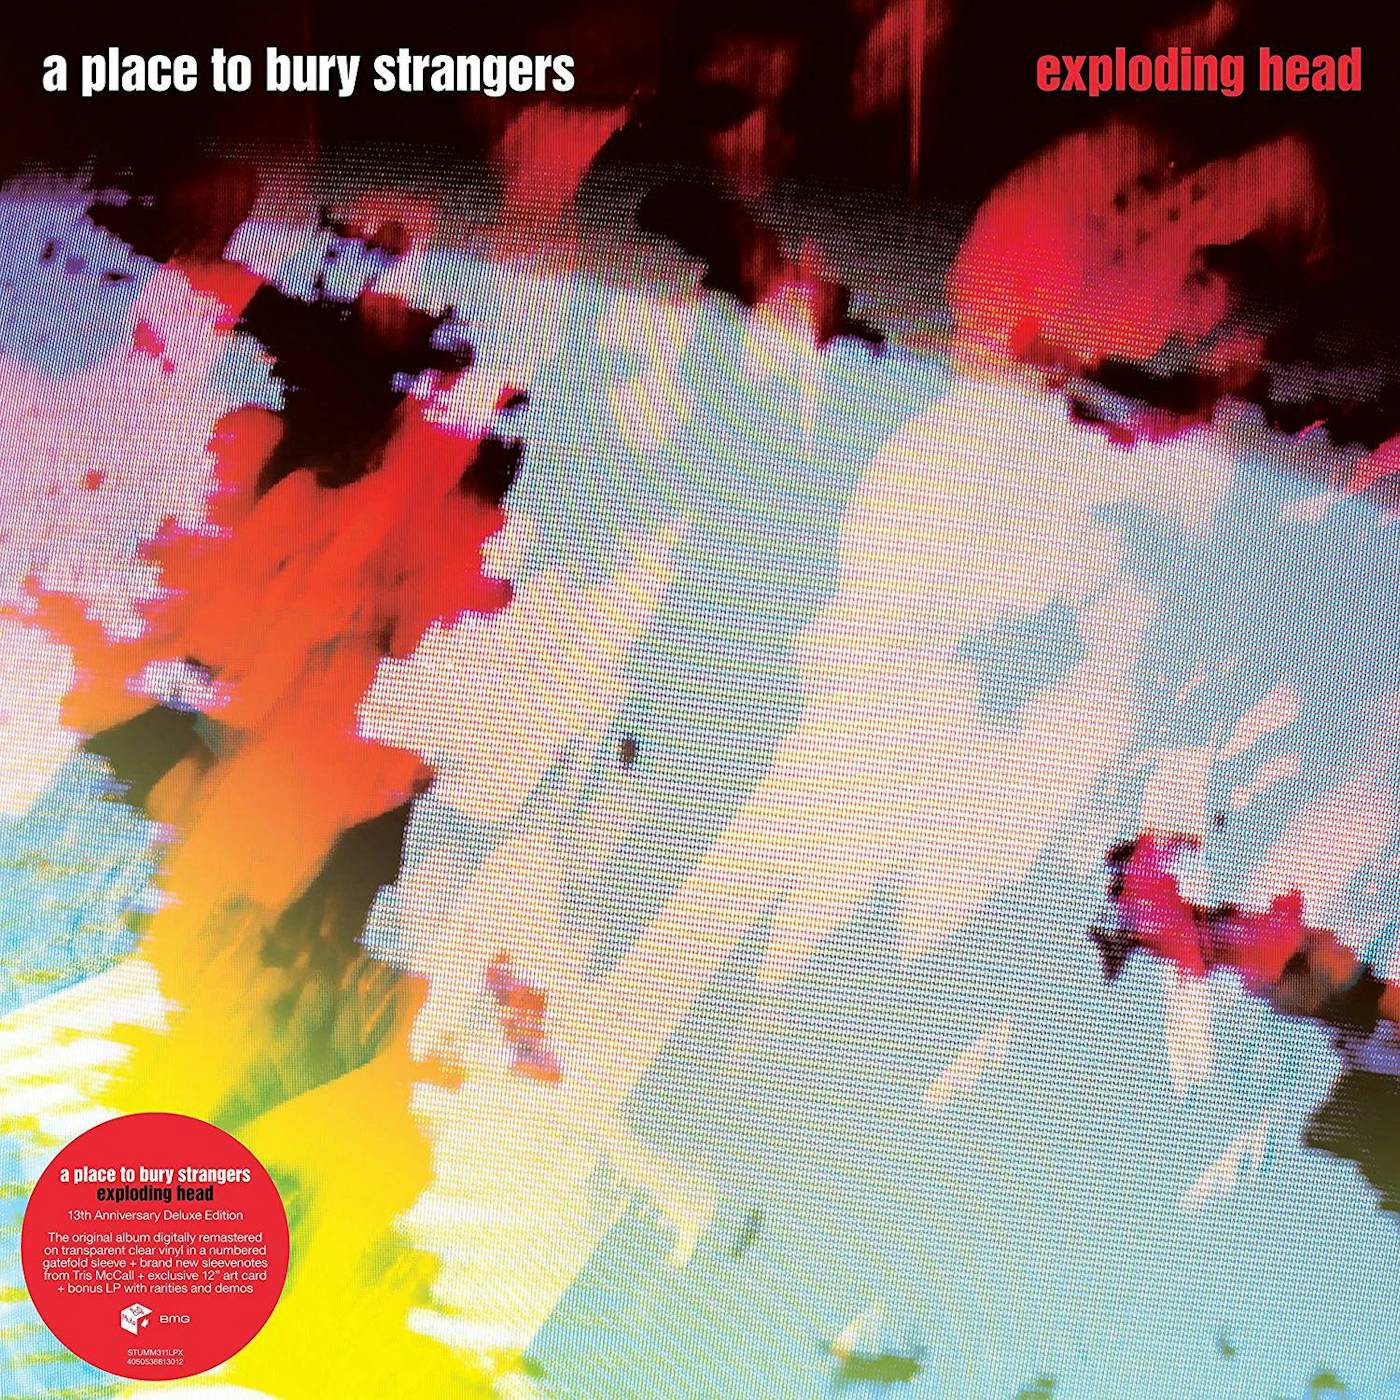 A Place To Bury Strangers Exploding Head Vinyl Record